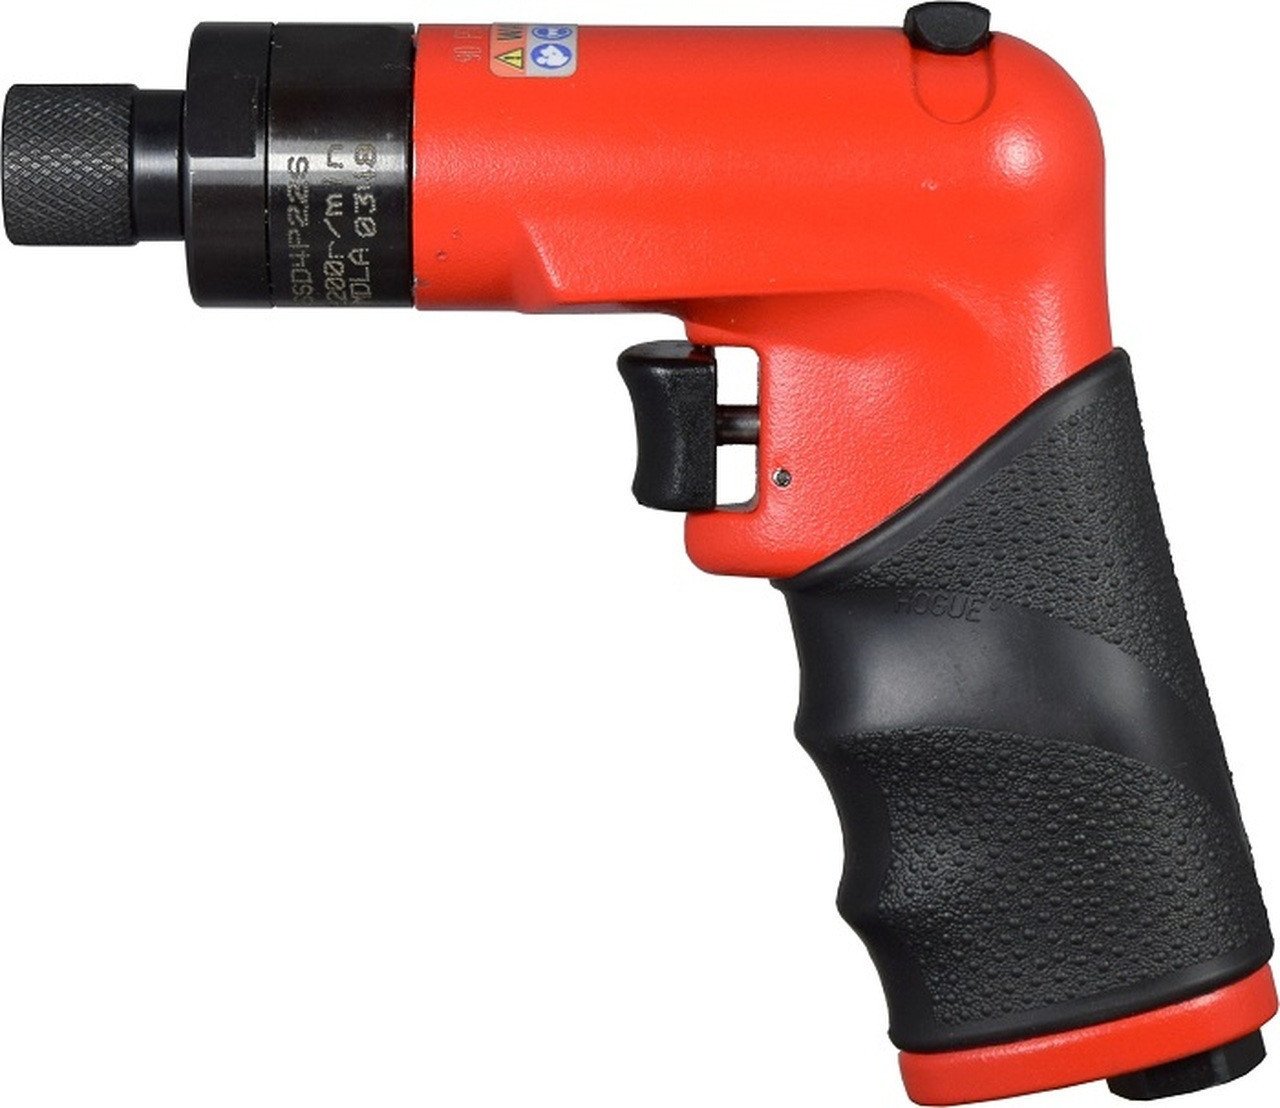 Sioux Tools SSD4P7S Stall Pistol Grip Screwdriver | Shuttle Reverse | 0.4 HP | 700 RPM | 65 in.-lb. Max Torque